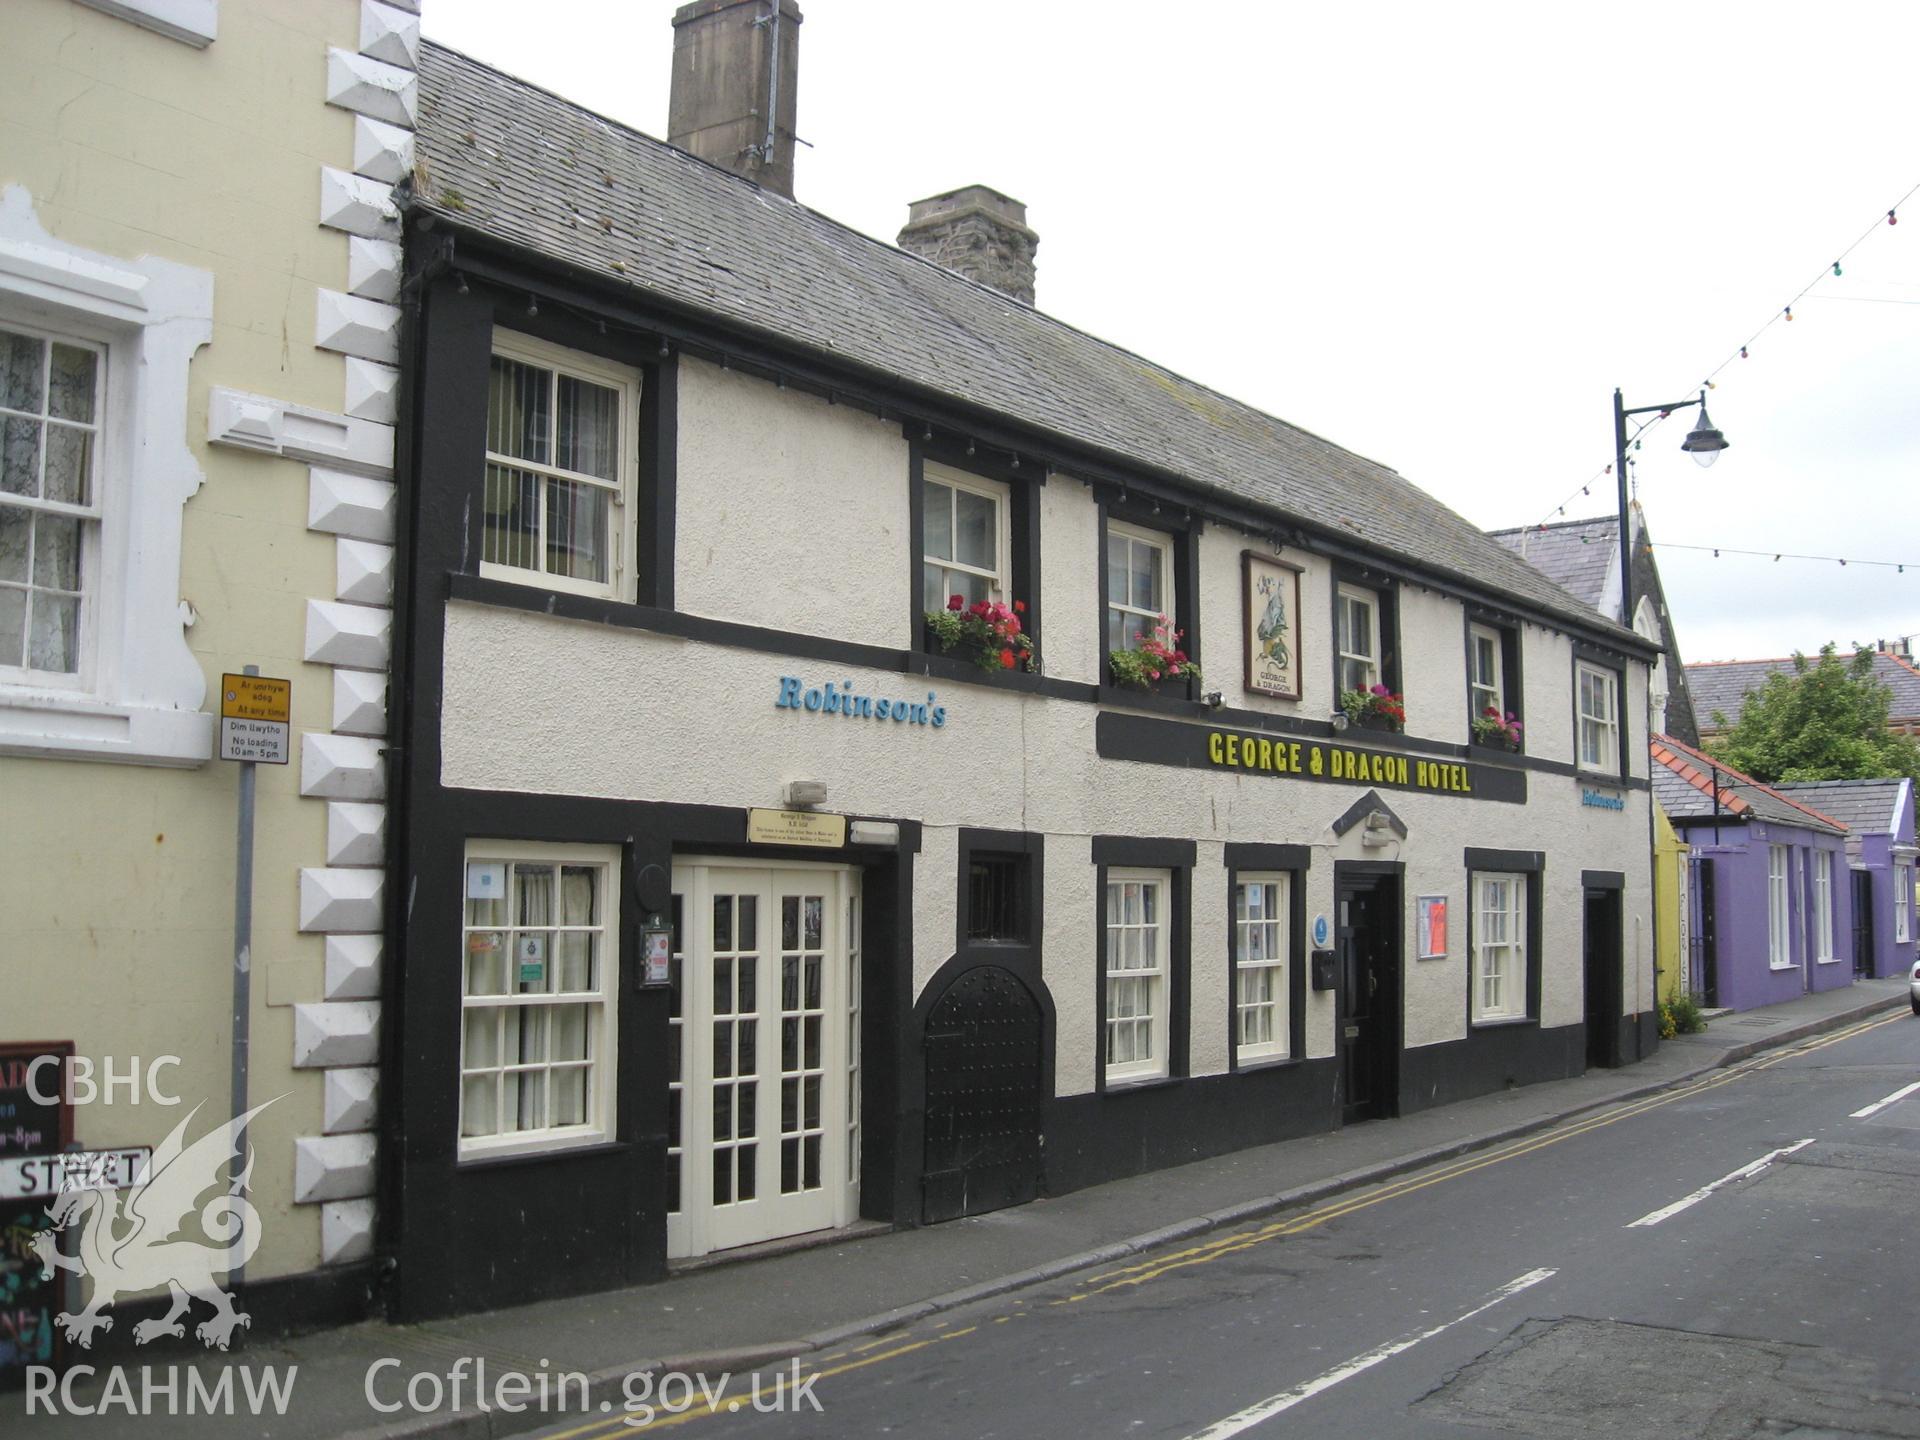 Colour photo of the George and Dragon, Beaumaris, taken by Paul R. Davis, 10th May 2005.